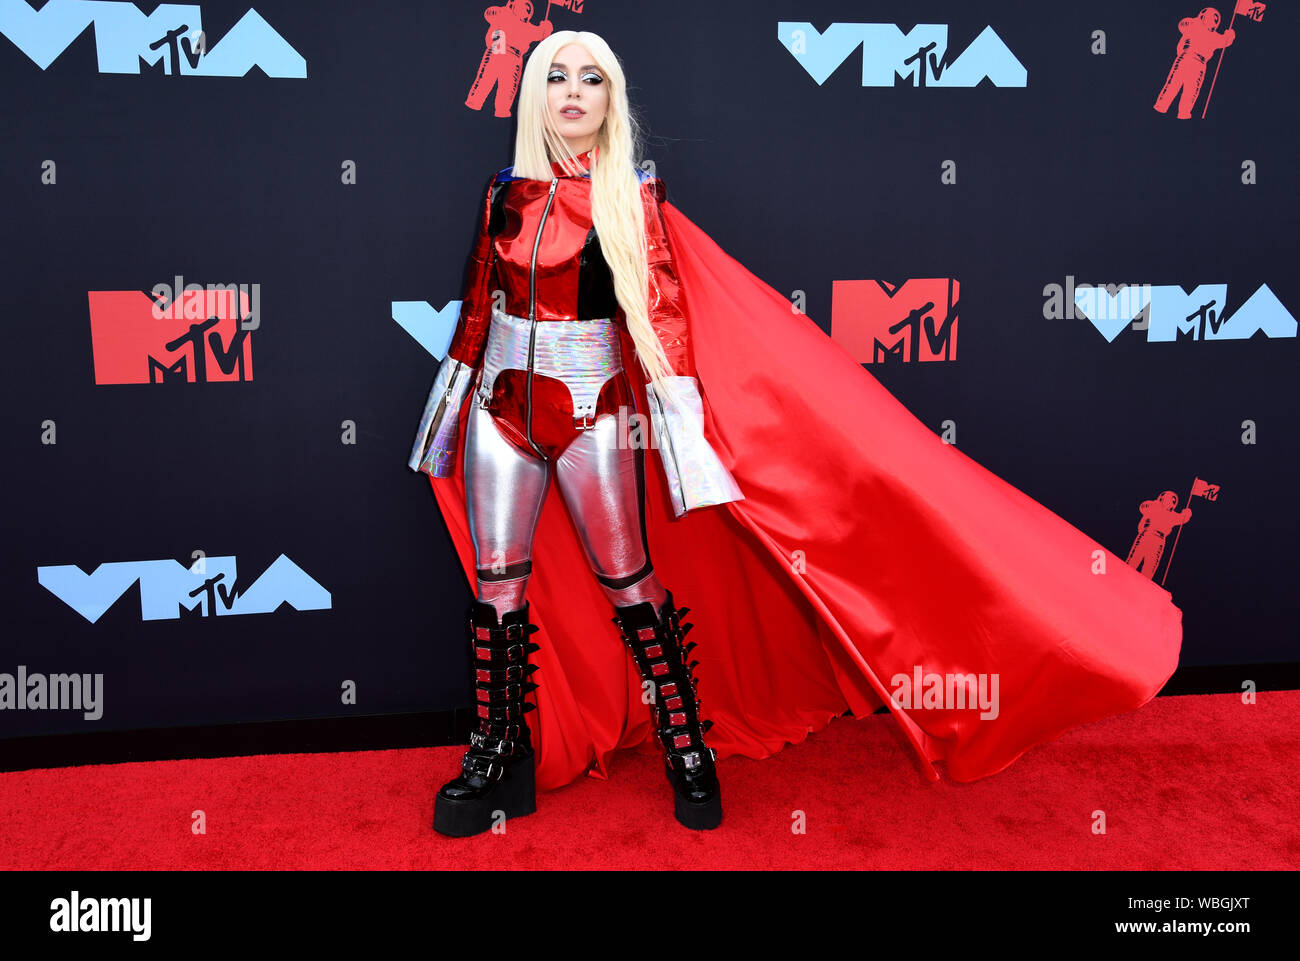 Ava Max attending the MTV Video Music Awards 2019 held at the Prudential Center in Newark, New Jersey. Stock Photo